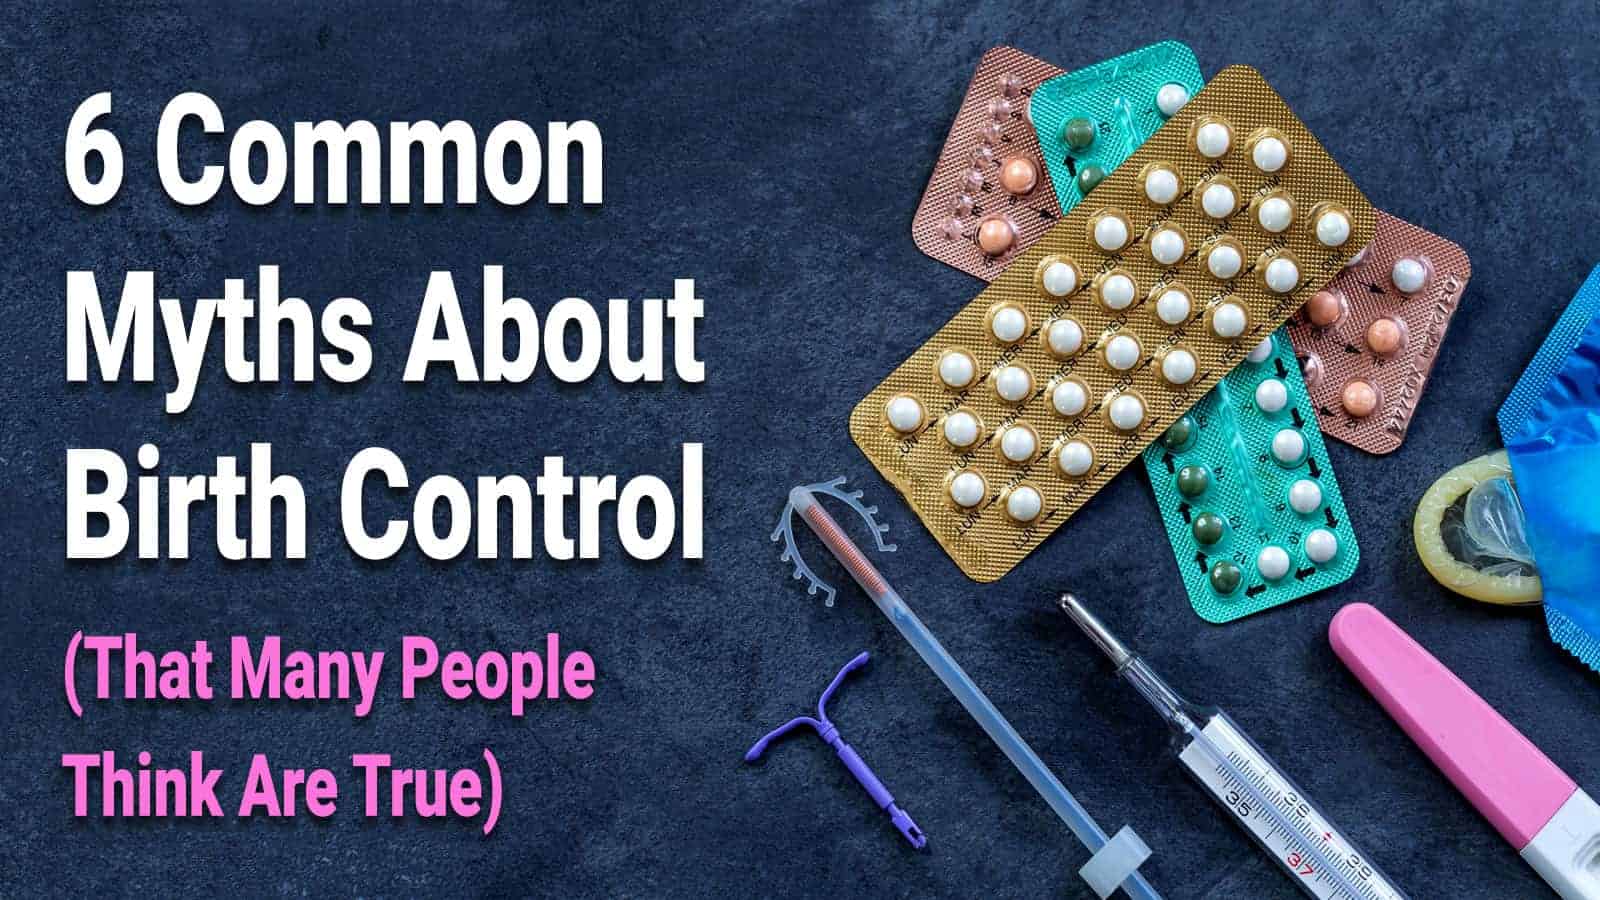 6 Common Myths About Birth Control (That Many People Think Are True)